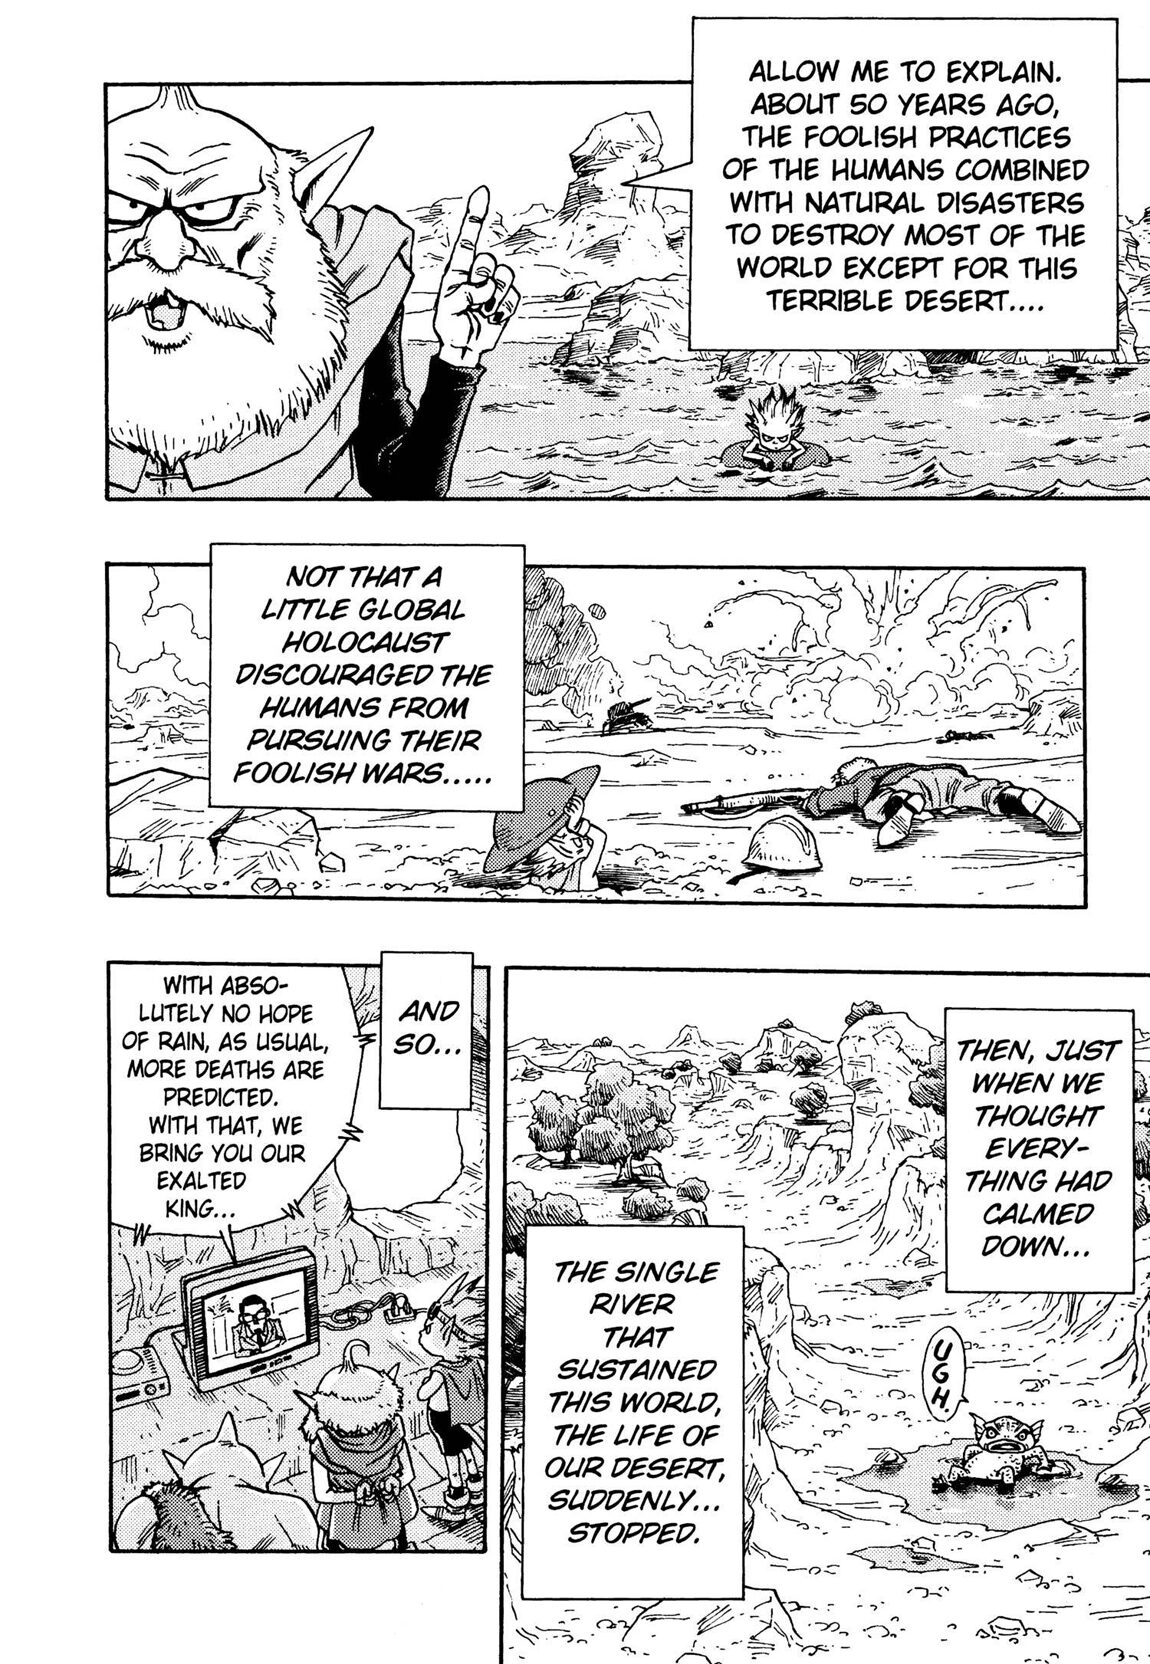 Thief gives a rundown of the world's current situation in Sand Land Ch. 1 "Let's Go!" (2000), Shueisha. Words and art by Akira Toriyama.